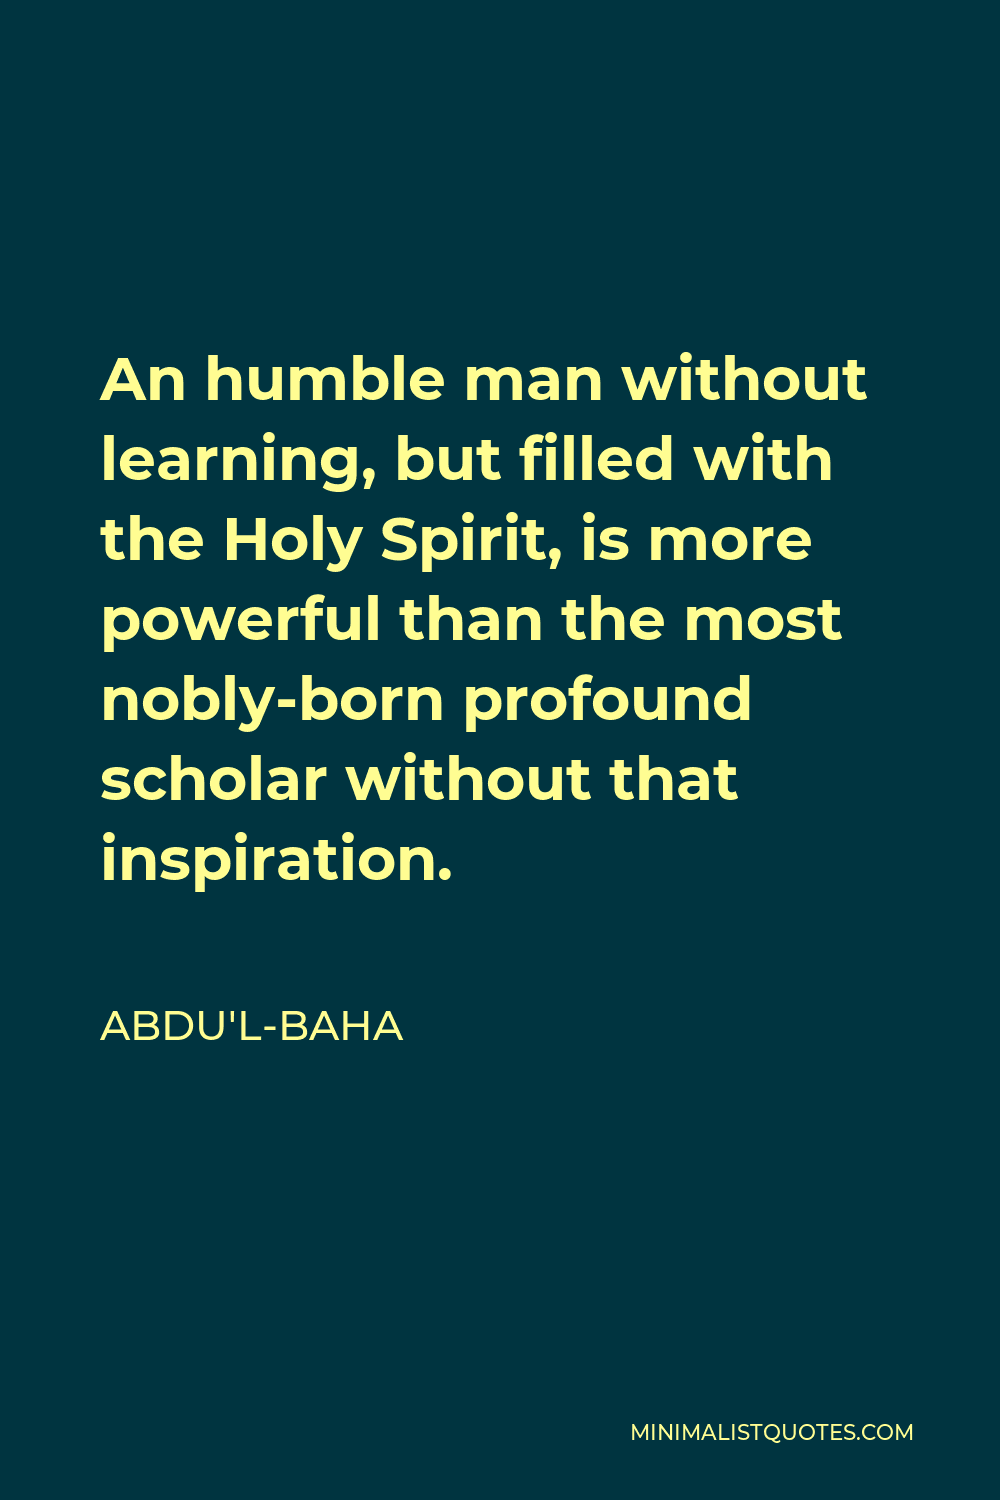 Abdu'l-Baha Quote - An humble man without learning, but filled with the Holy Spirit, is more powerful than the most nobly-born profound scholar without that inspiration.